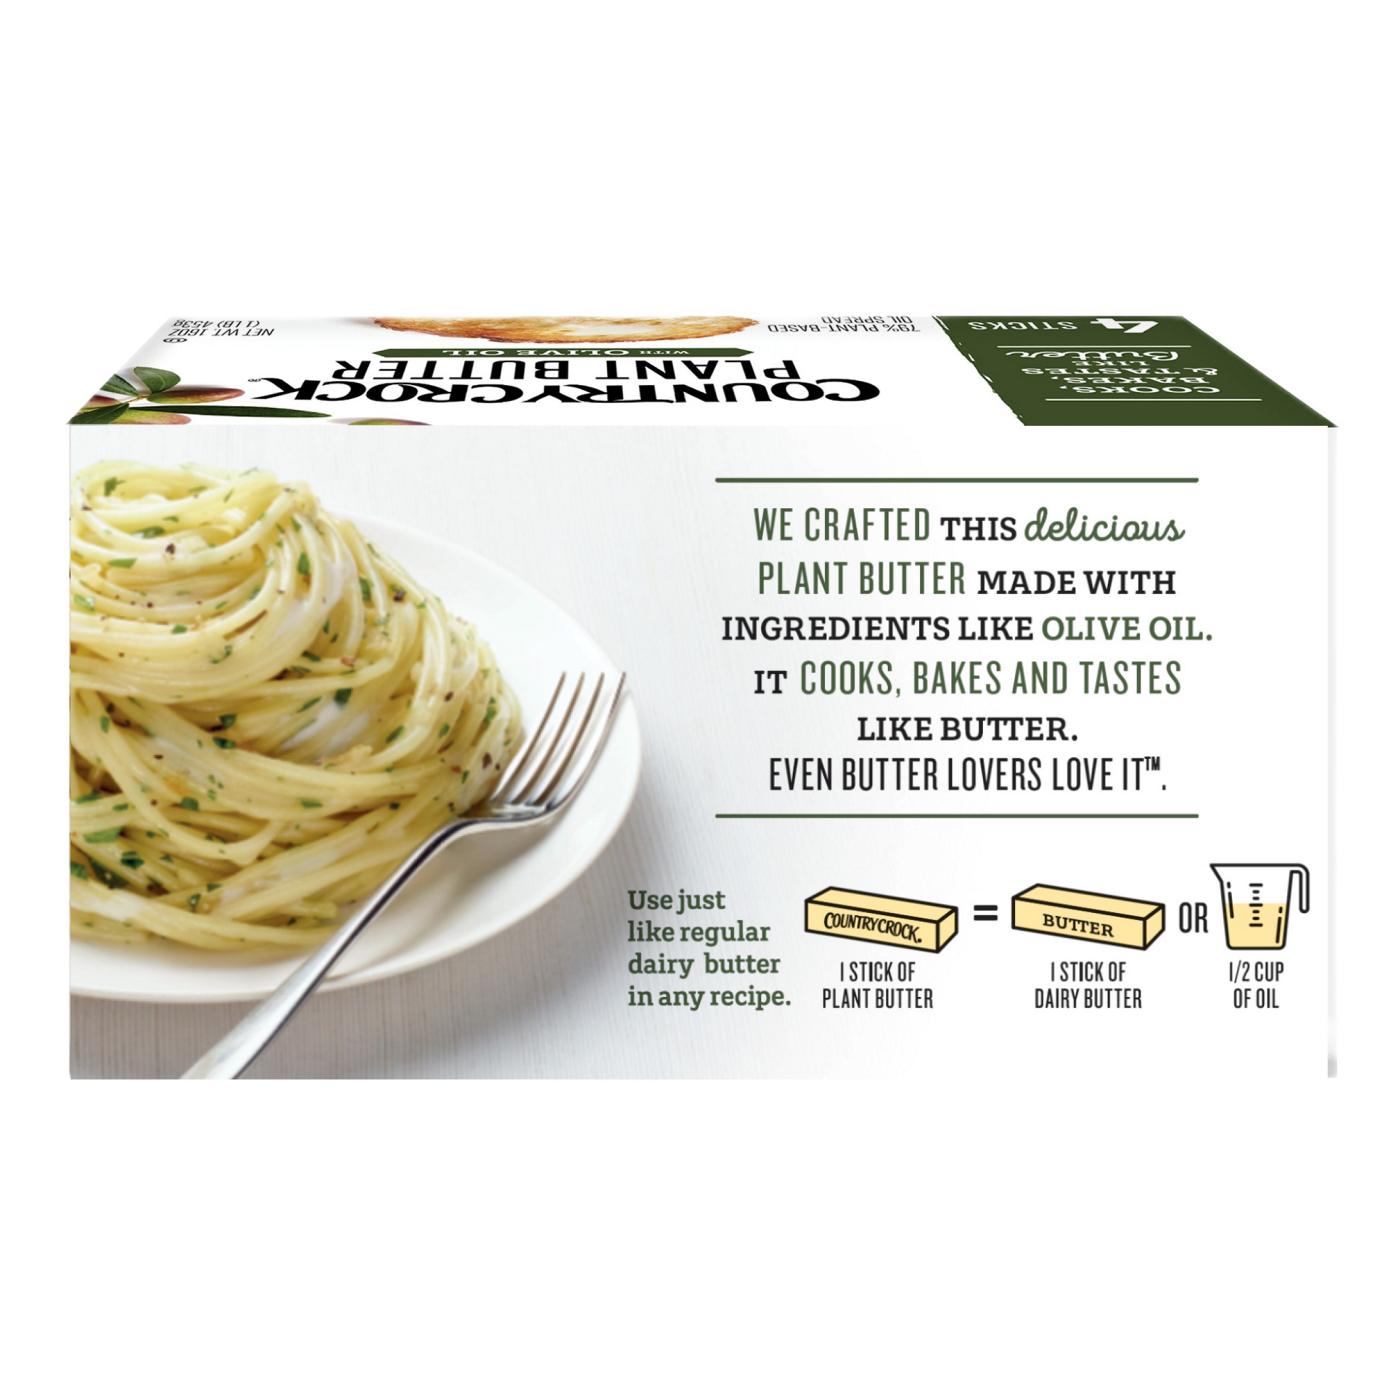 Country Crock Dairy Free Plant Butter with Olive Oil Sticks; image 5 of 9